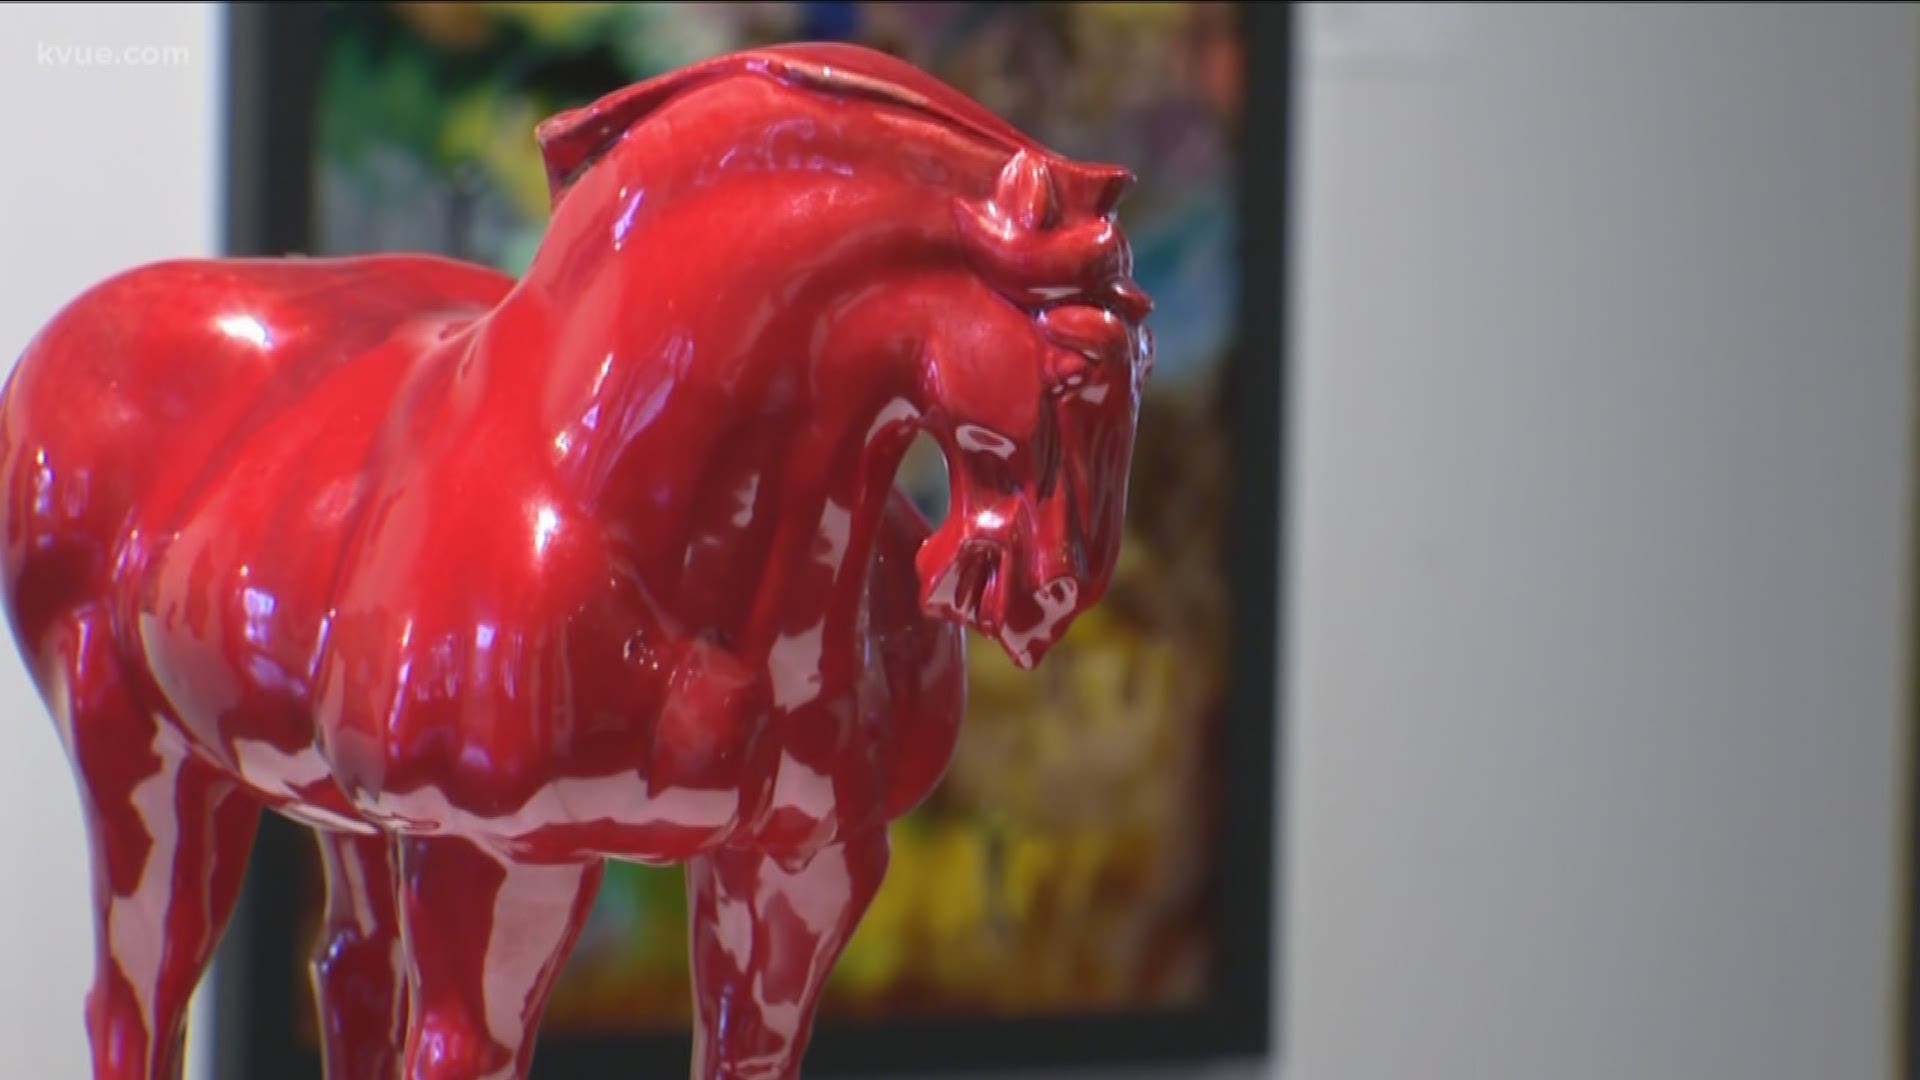 A Chinese artist known as the "ceramic art master" chose Austin to make his debut in America.